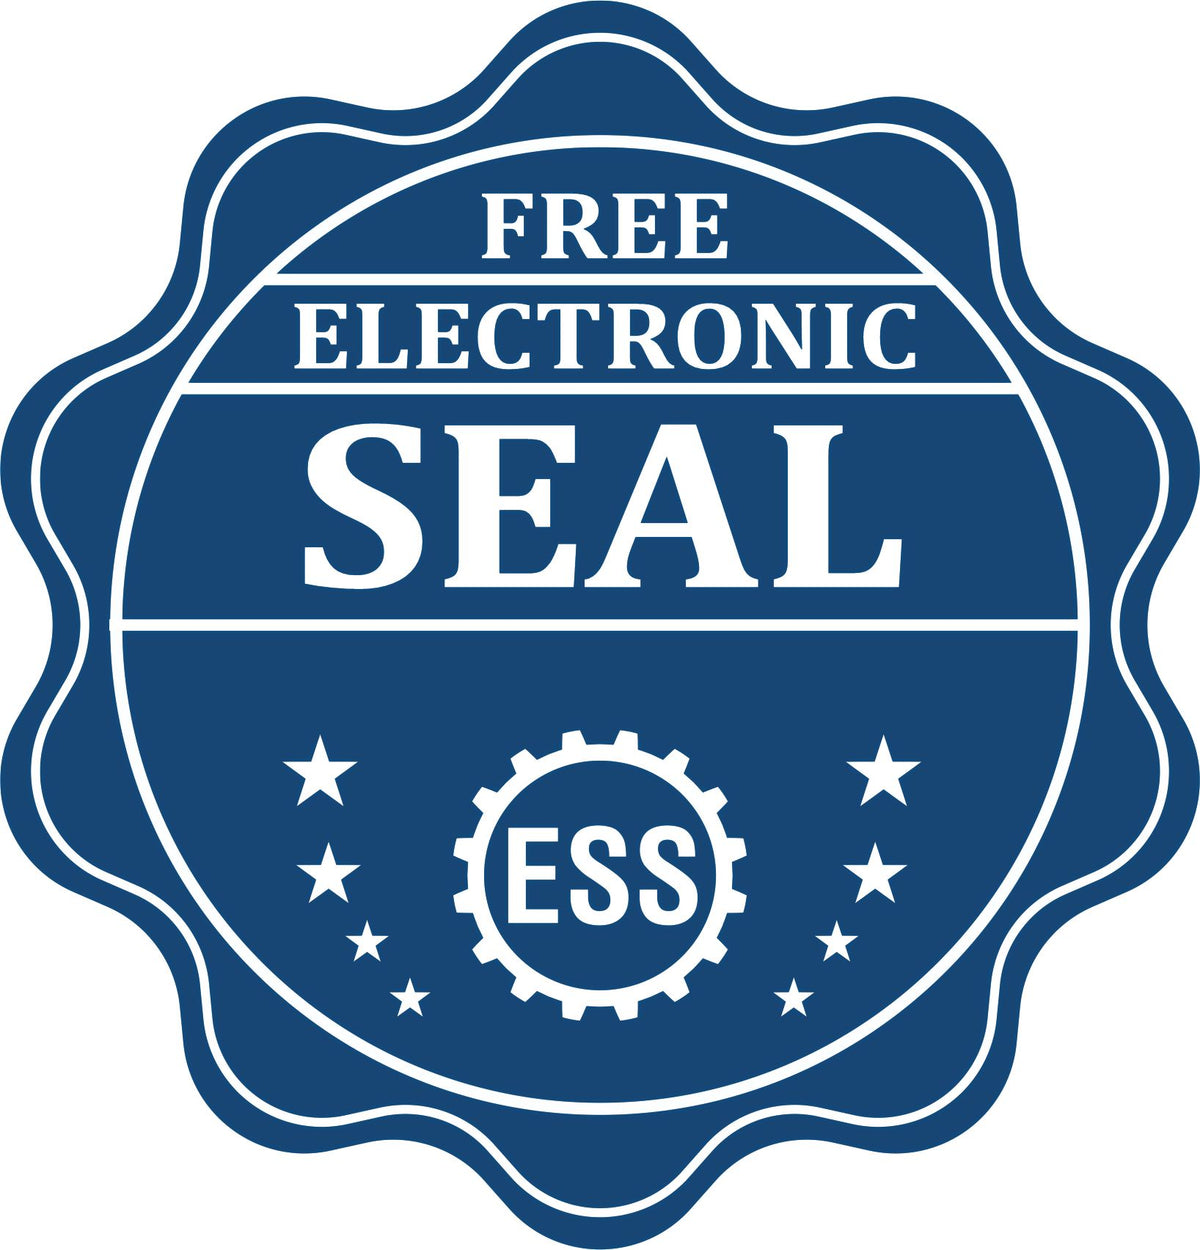 A badge showing a free electronic seal for the State of Kentucky Extended Long Reach Geologist Seal with stars and the ESS gear on the emblem.